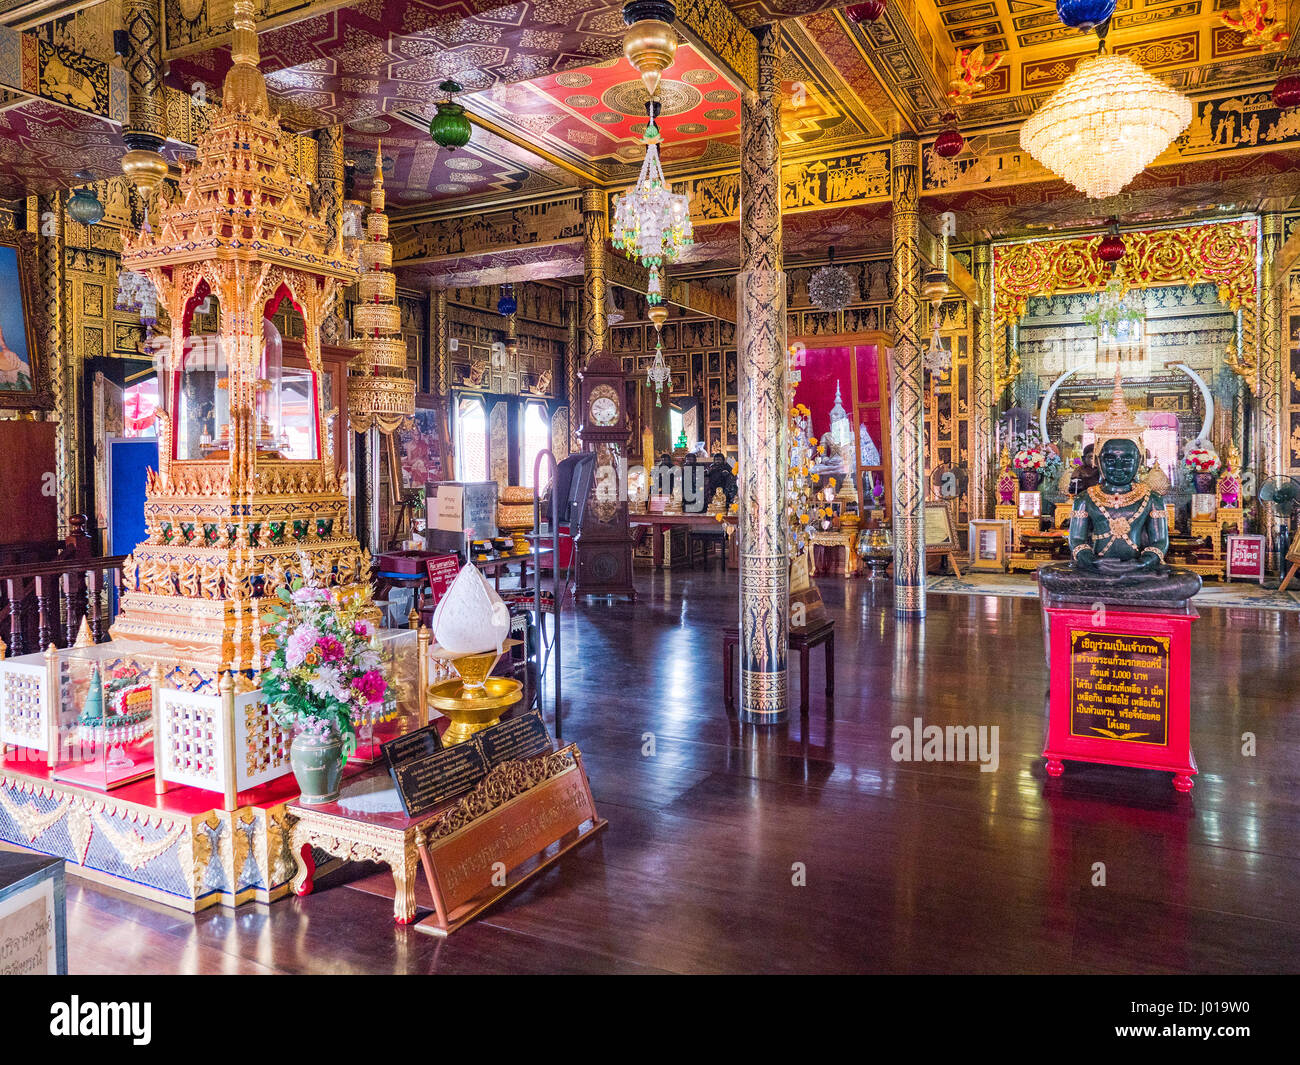 Interior of a temple building at Wat Chulamanee in Amphawa, Samut Songkhram Province, Thailand. Stock Photo